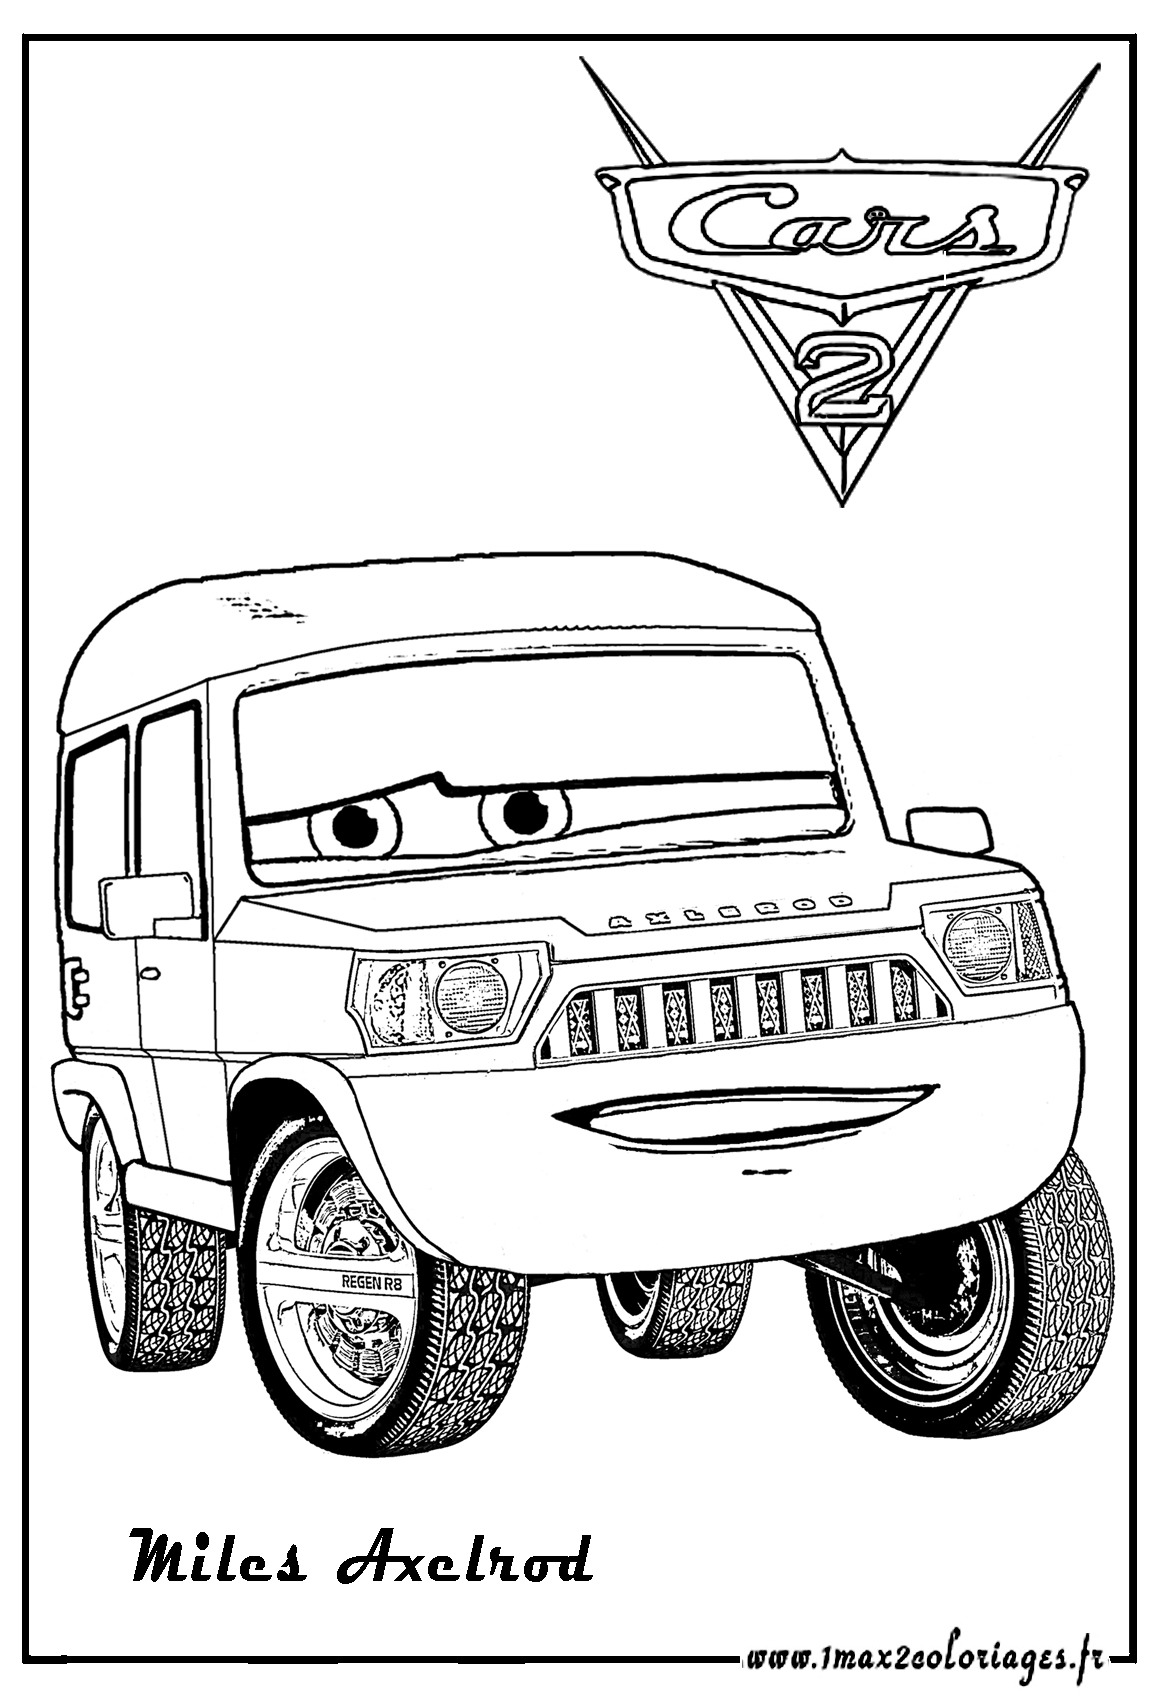 cars 2 pictures to print cars 2 to download for free cars 2 kids coloring pages print cars 2 pictures to 